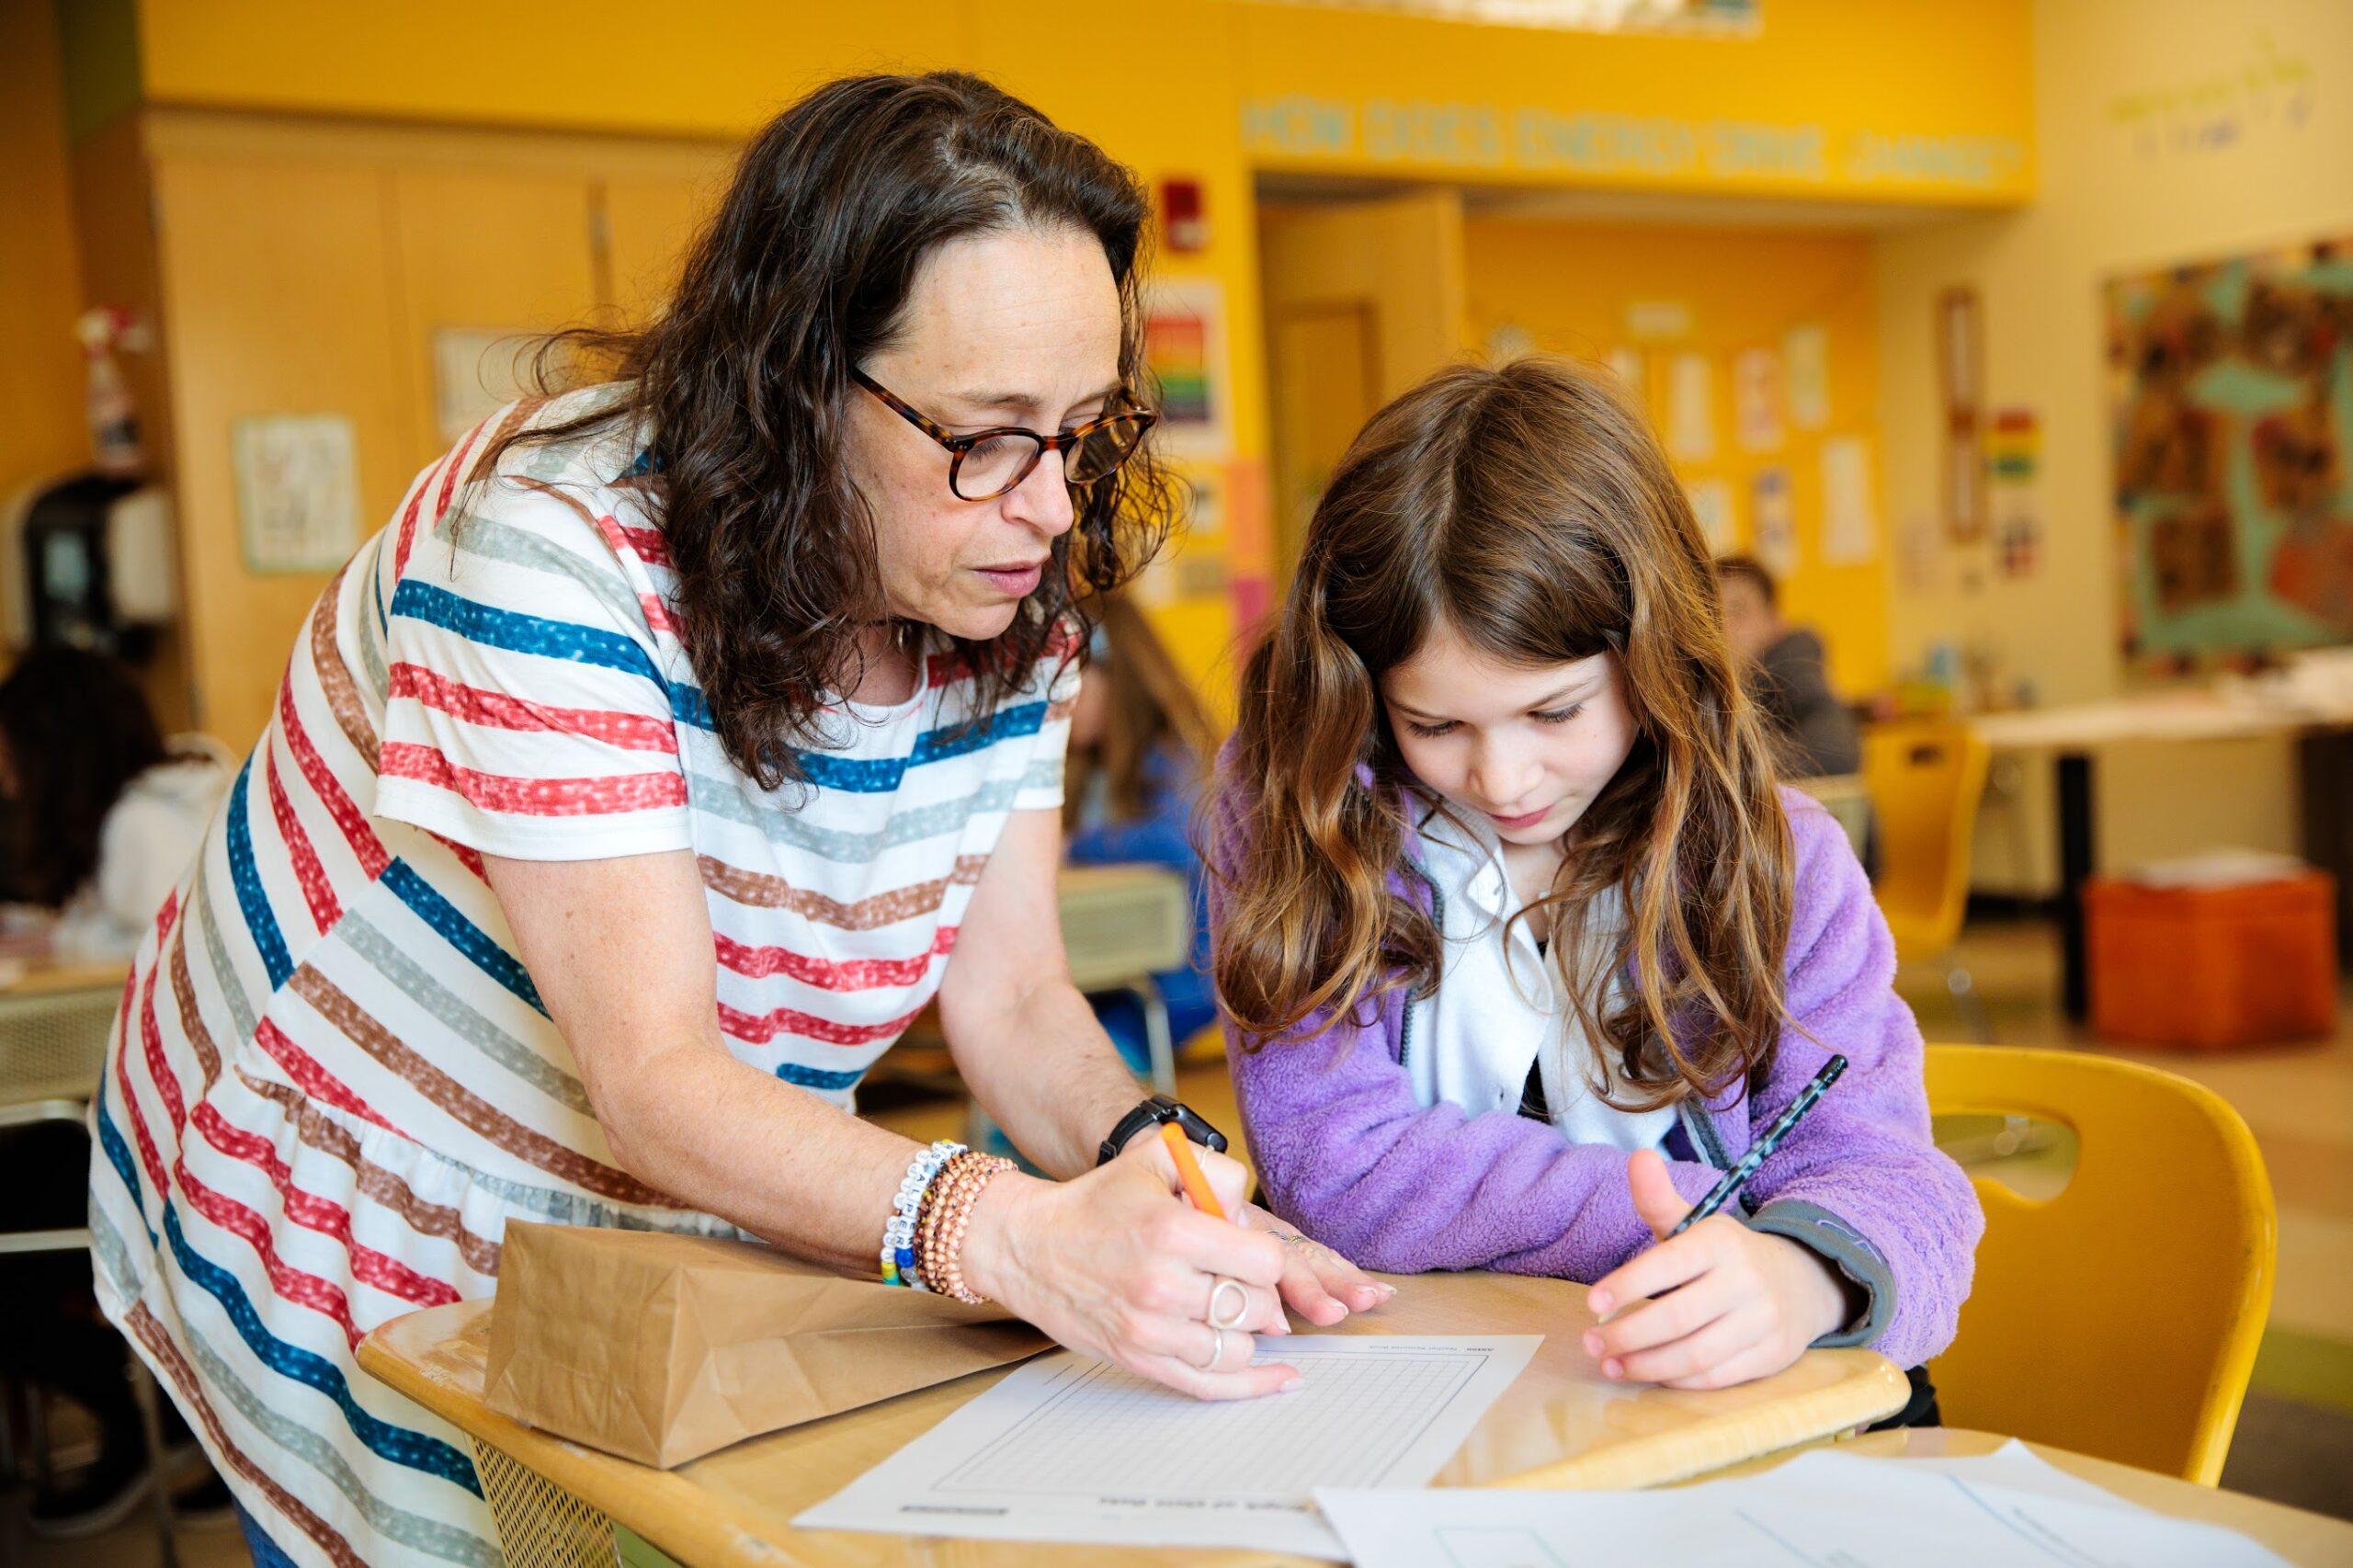 An elementary school student works with a teacher during class